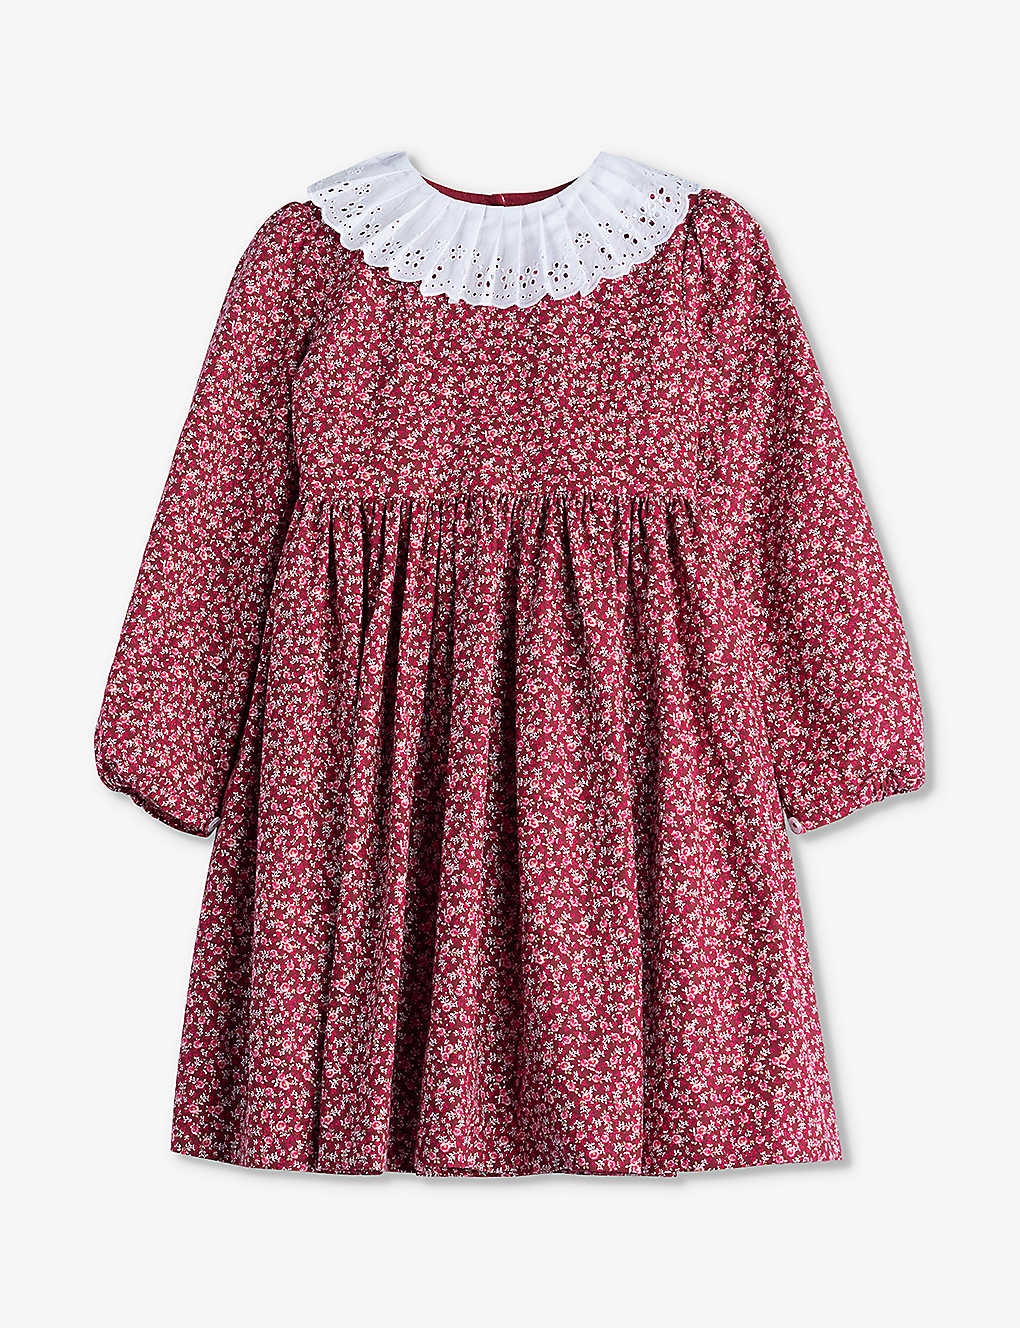 Trotters Girls Berry Ditsy Kids Bonnie Floral-print Cotton Dress 2-11 Years